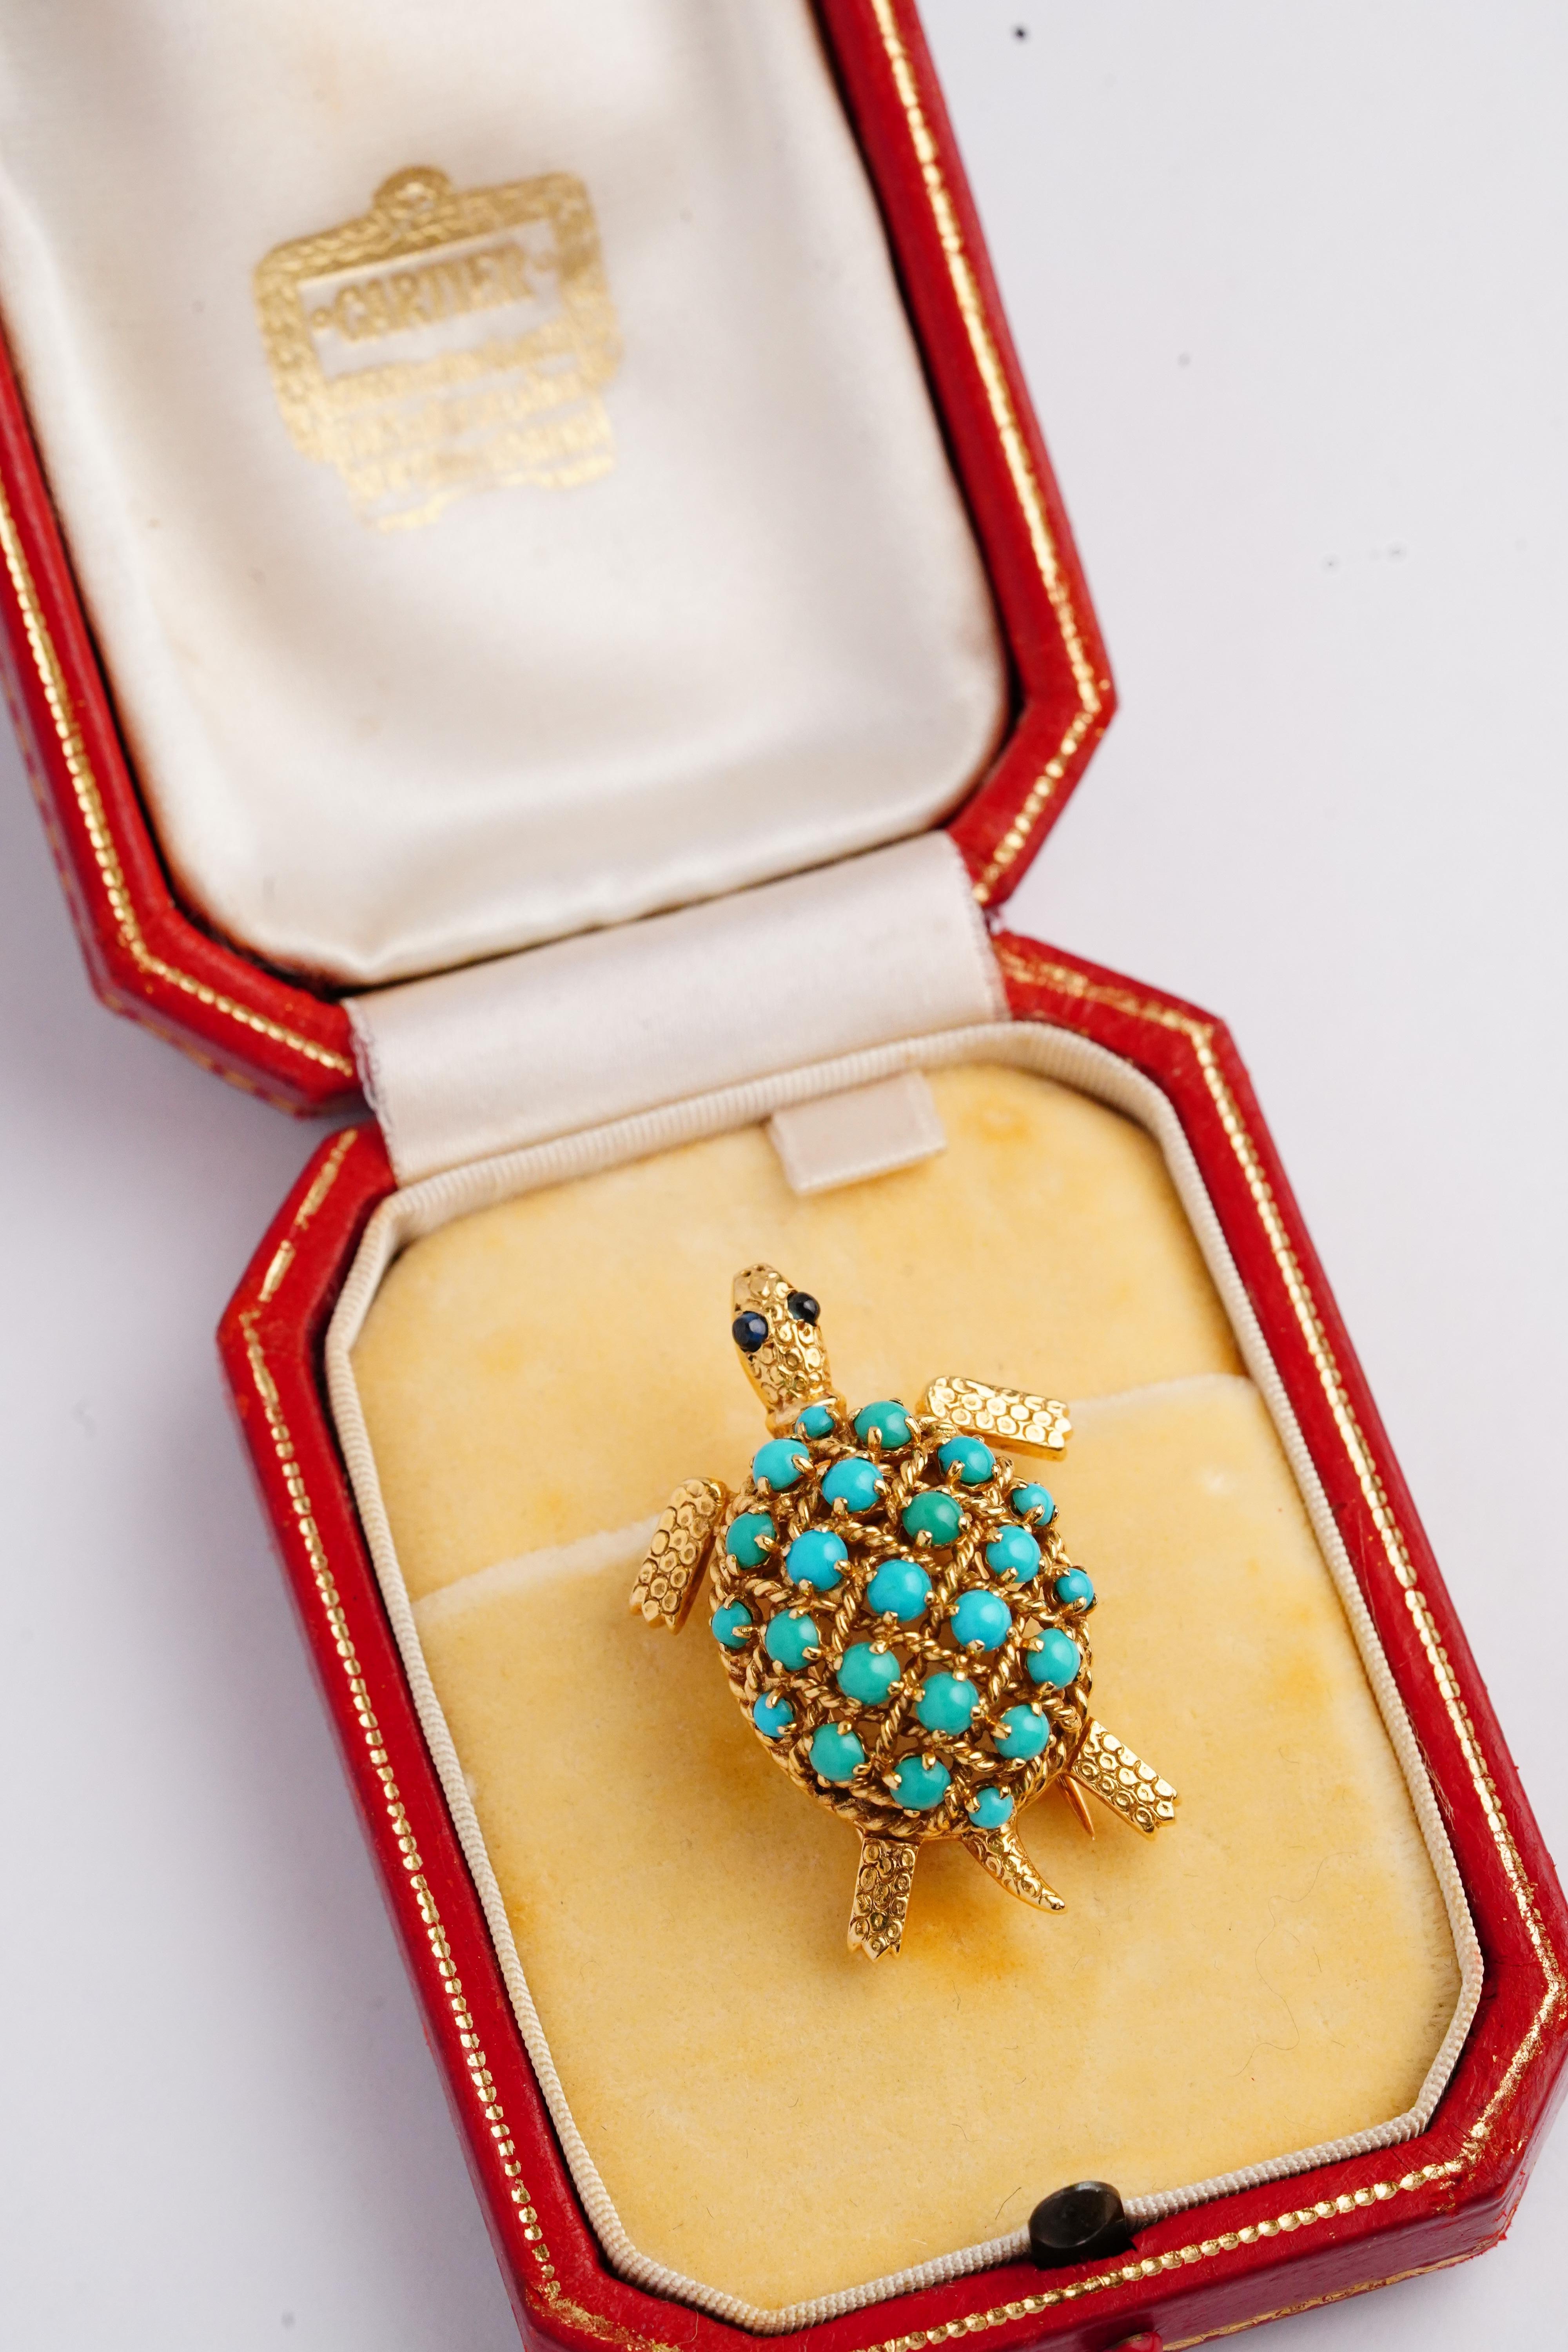 Cartier Paris Vintage Yellow Gold Turquoise Sapphire Turtle Brooch In Excellent Condition For Sale In London, GB